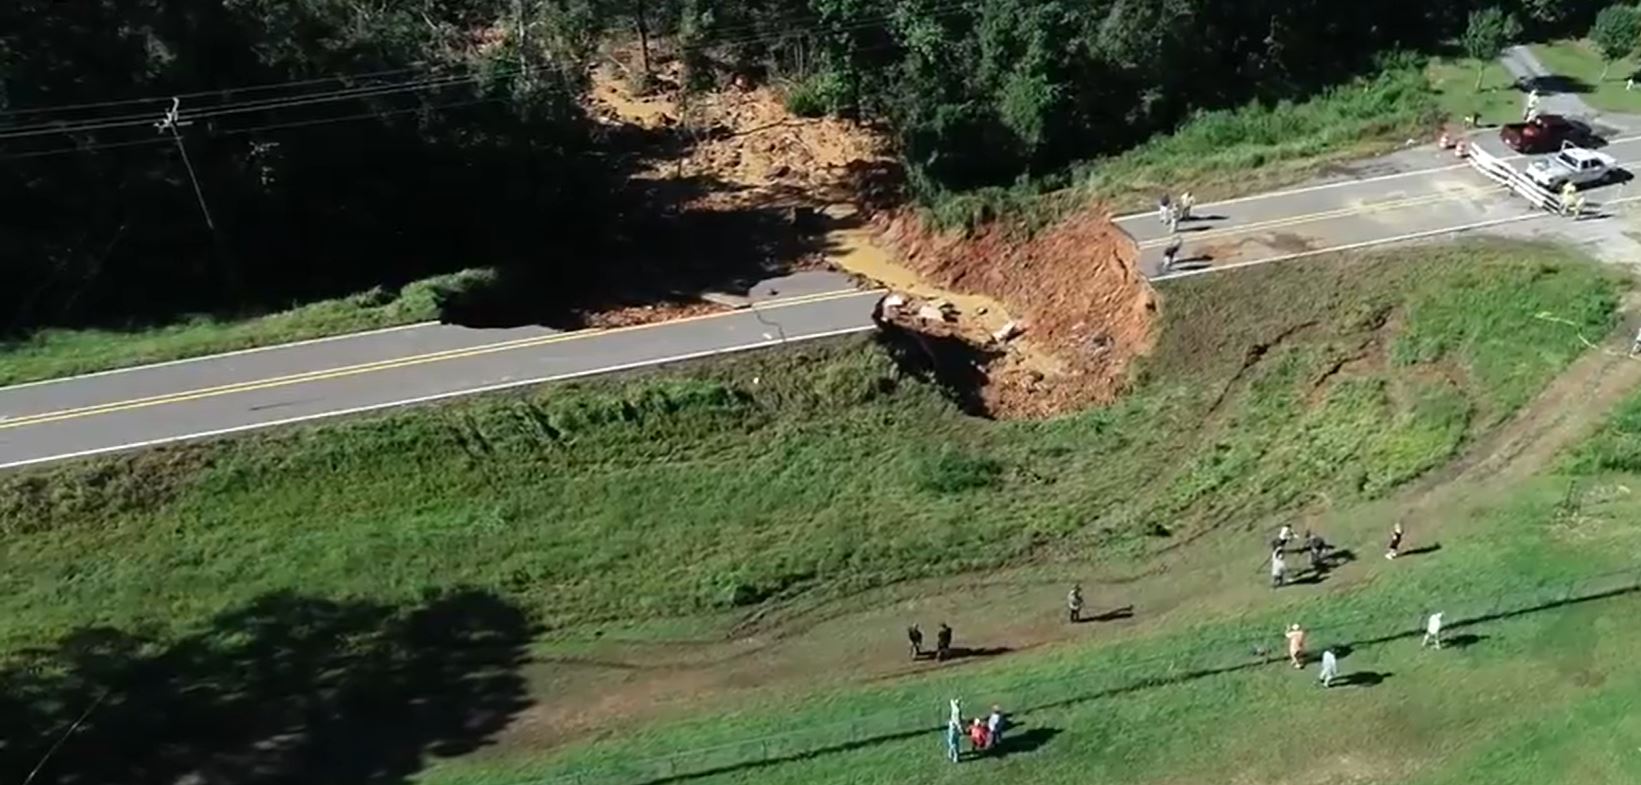 An oblique view of the fatal landslide in George County